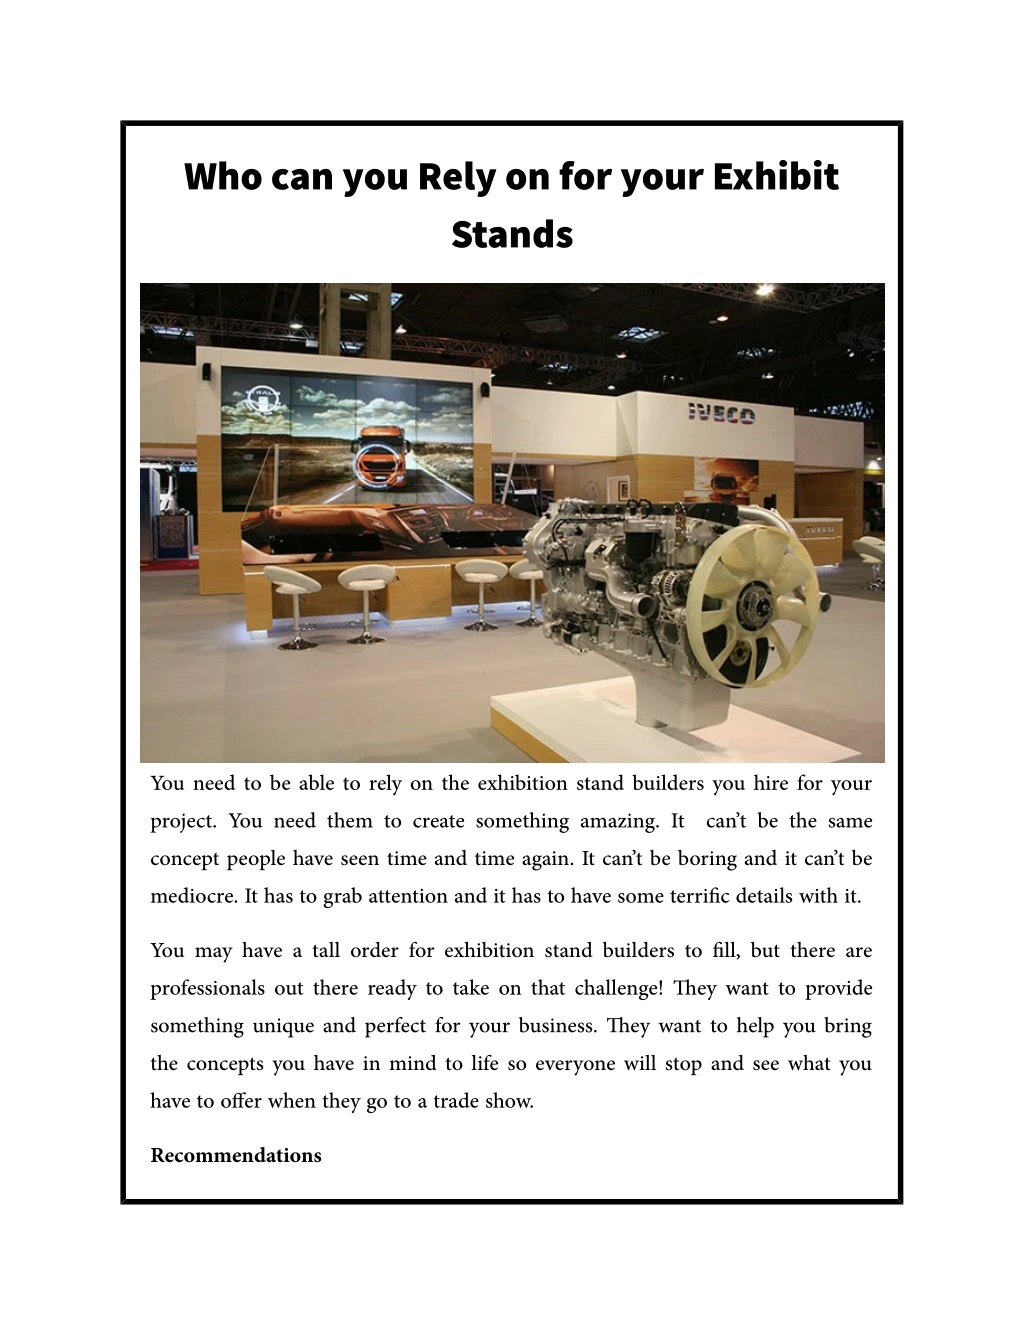 who can you rely on for your exhibit stands